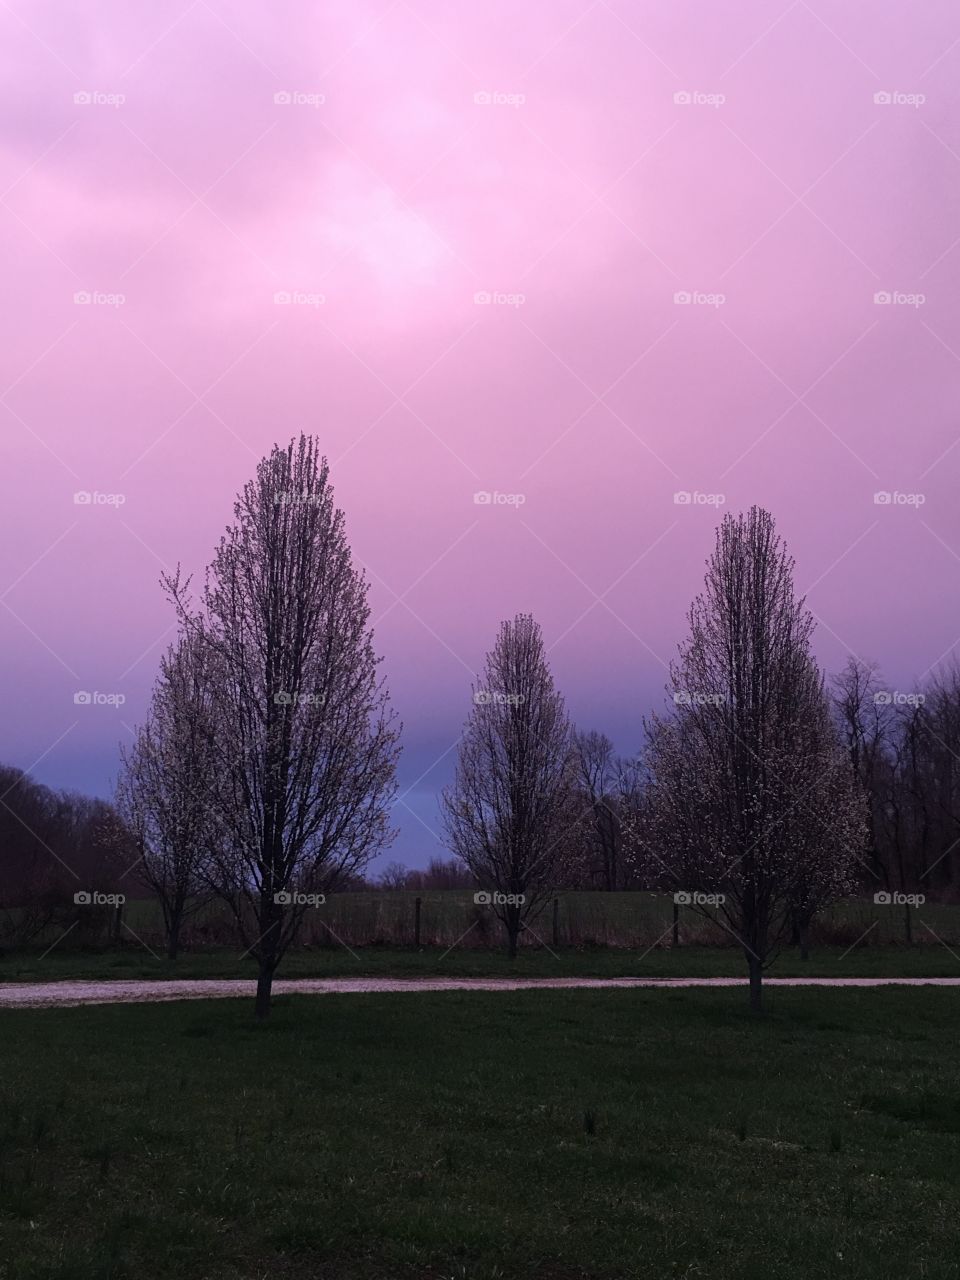 A lot of my friends don’t believe me but the sky was soo purple on this day that it was almost like a filter. It was truly beautiful but also bittersweet because it only lasted for about 30mins and then it was dark outside. 